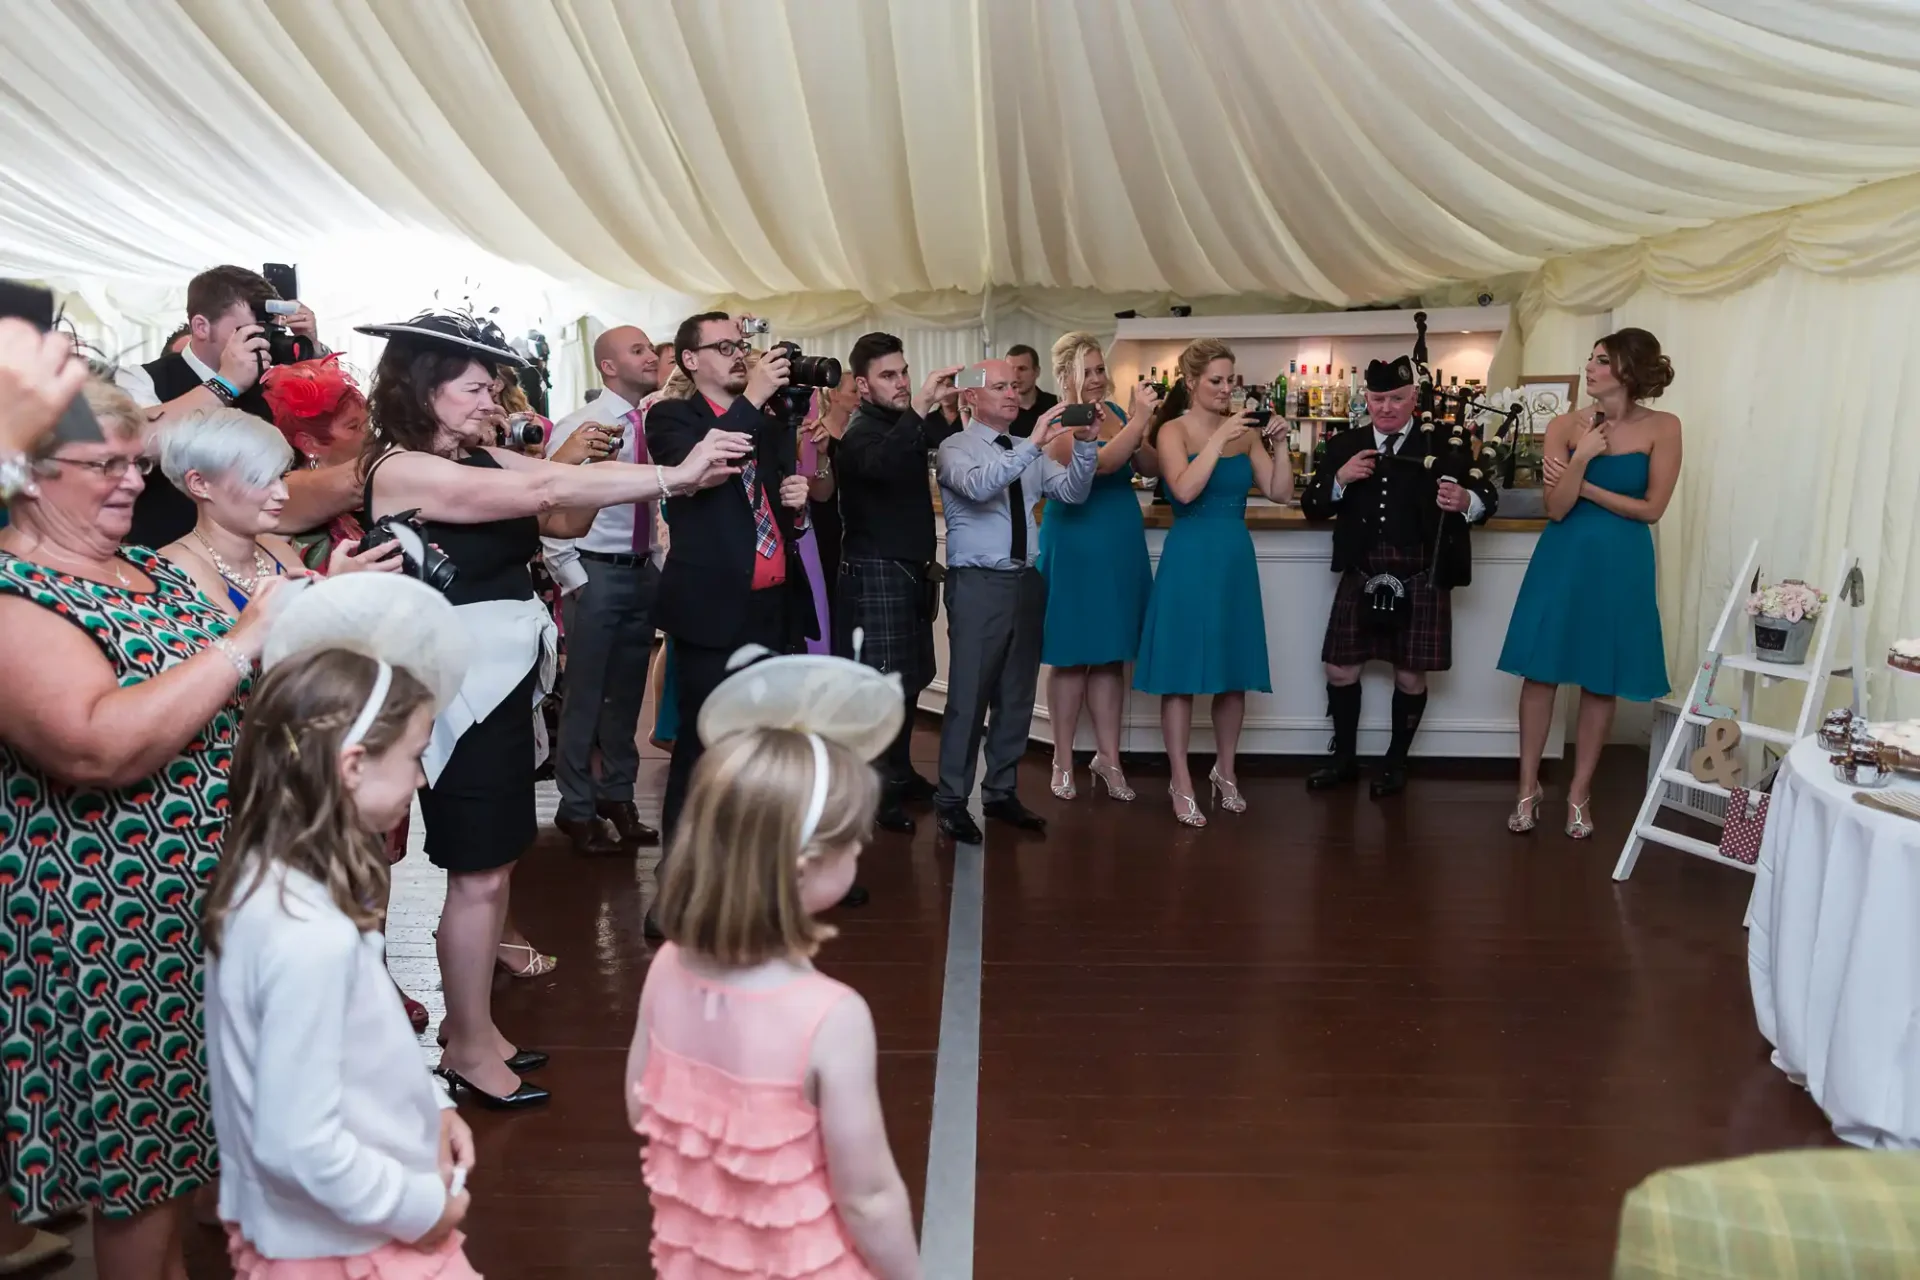 Guests in formal attire taking photos of a bride and groom entering a wedding reception tent, with a bagpiper present.